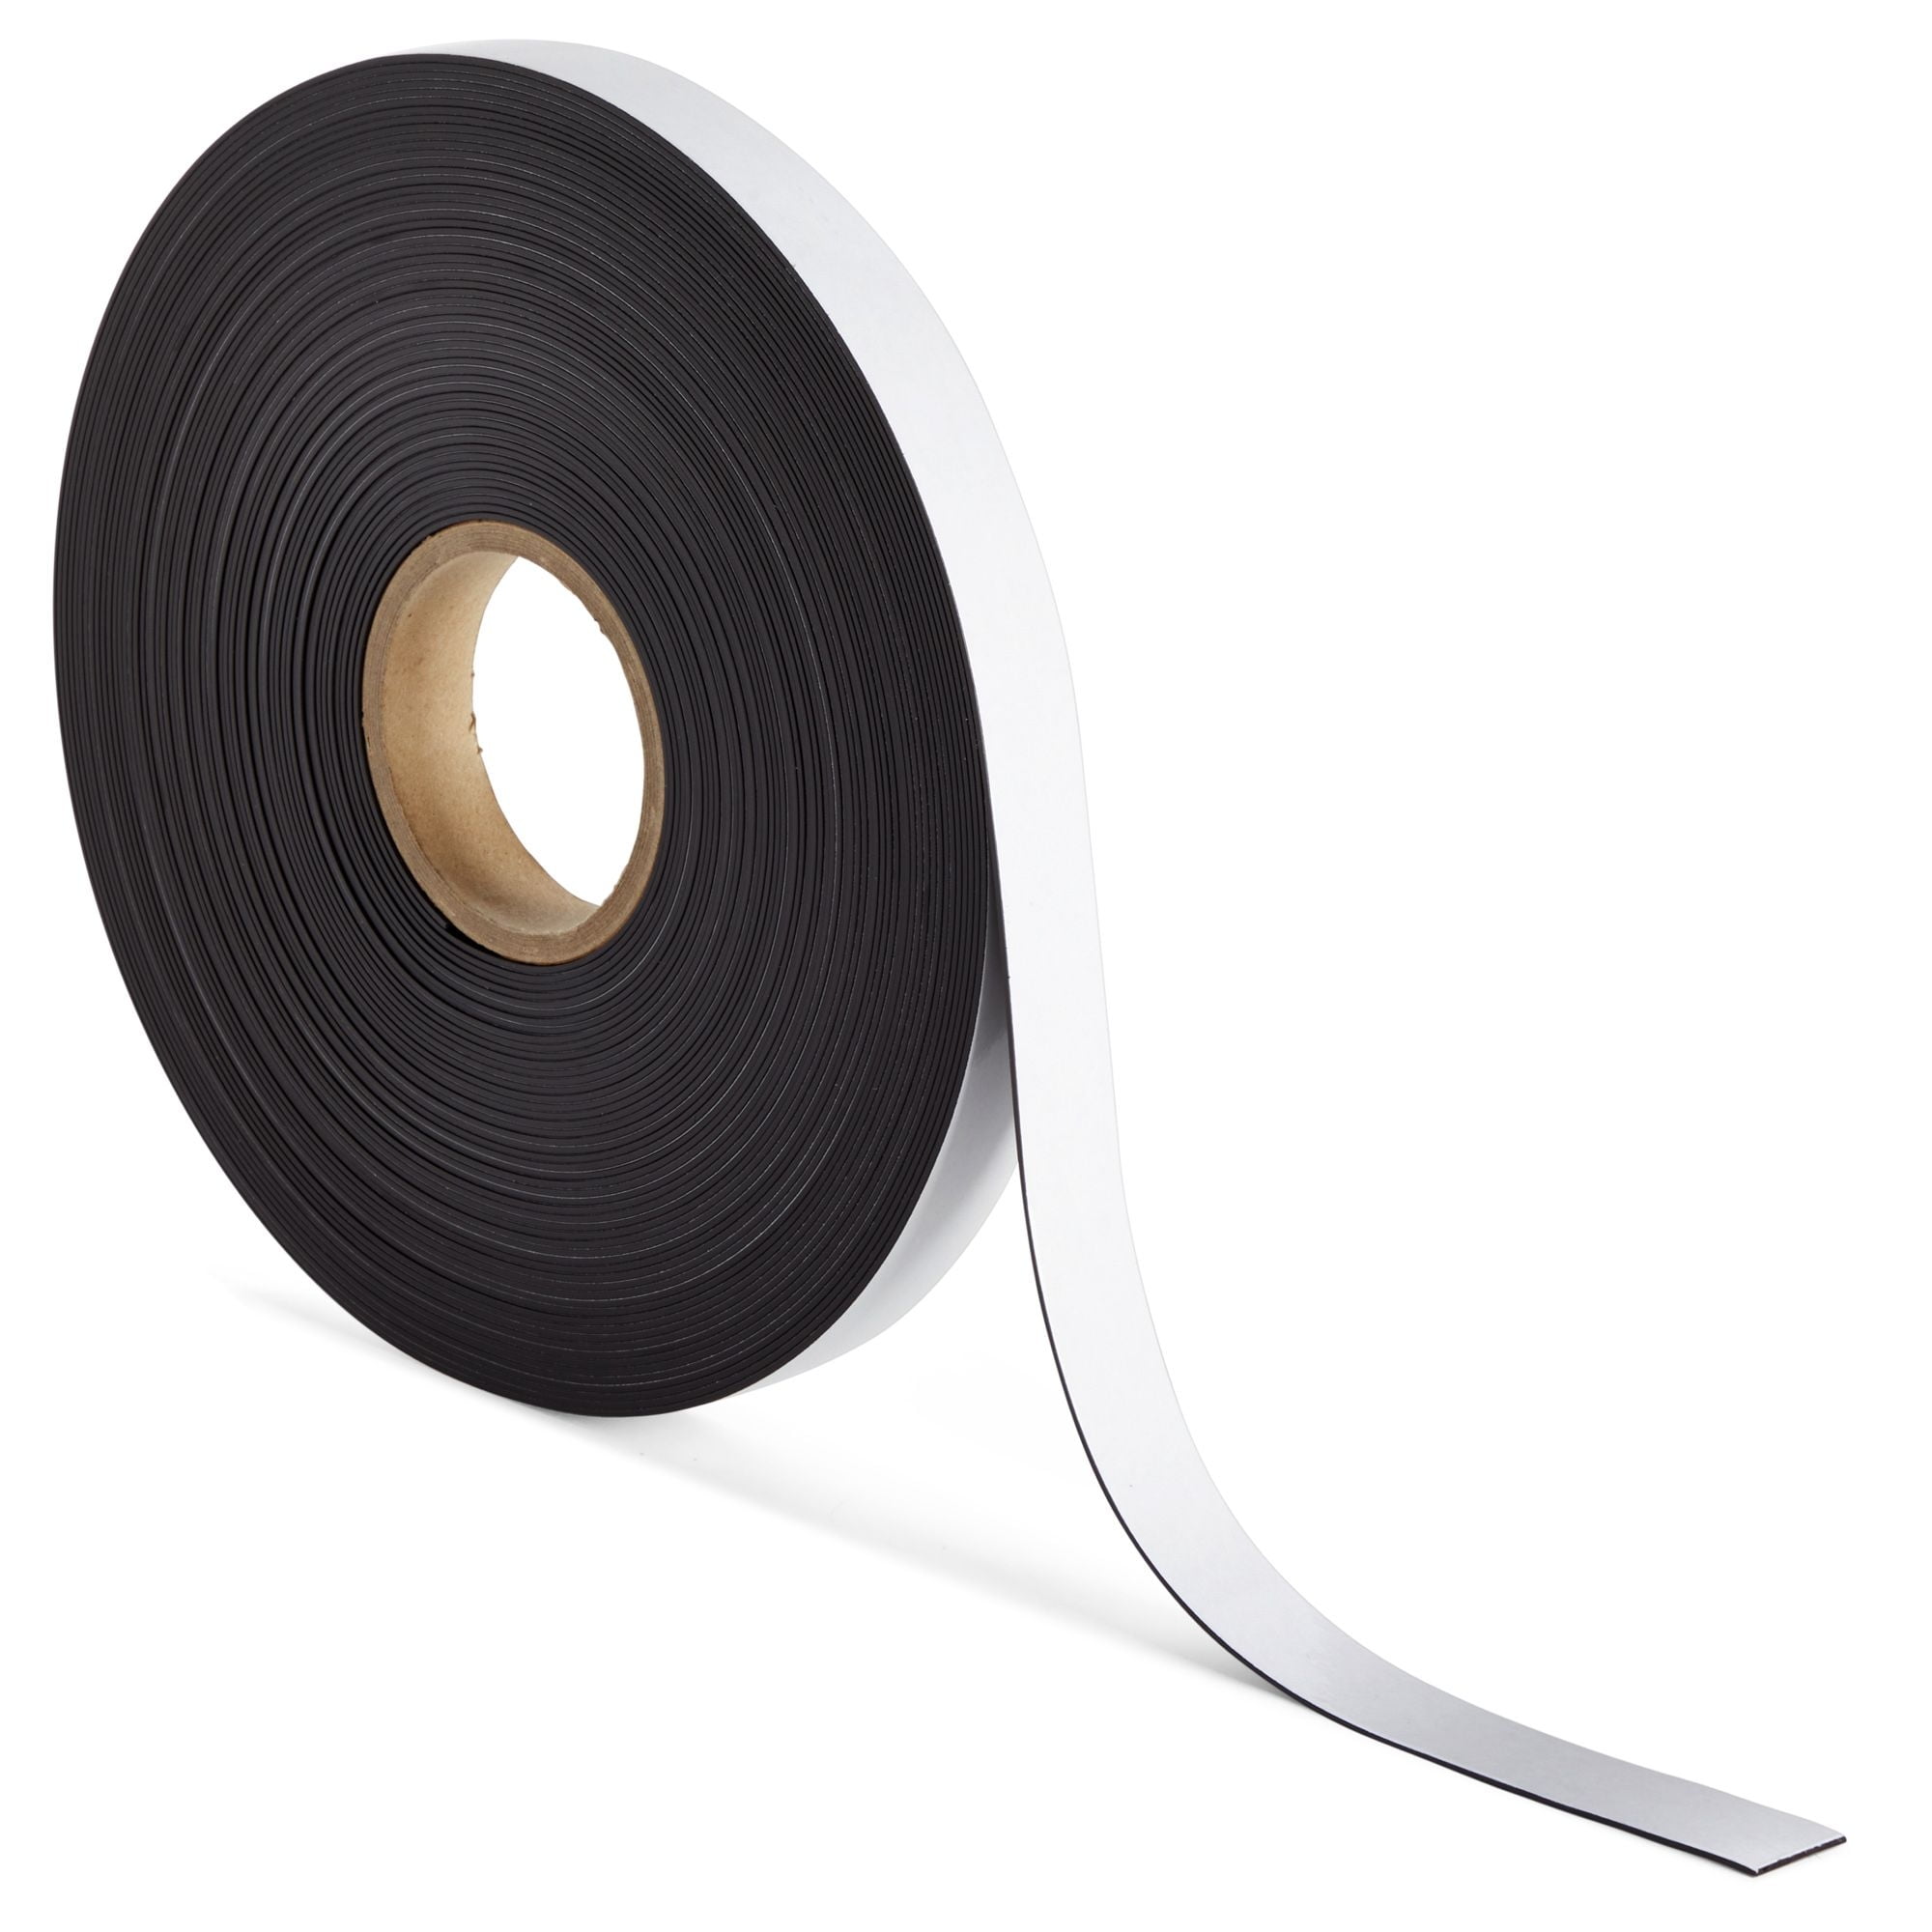 Atack Magnetic Tape Strip Roll, 1/2-Inch x 10-Foot, Pack of 3, Self-Adhesive, Peel and Stick on Double-Sided Magnet Strips for Fridge, Crafts and DIY